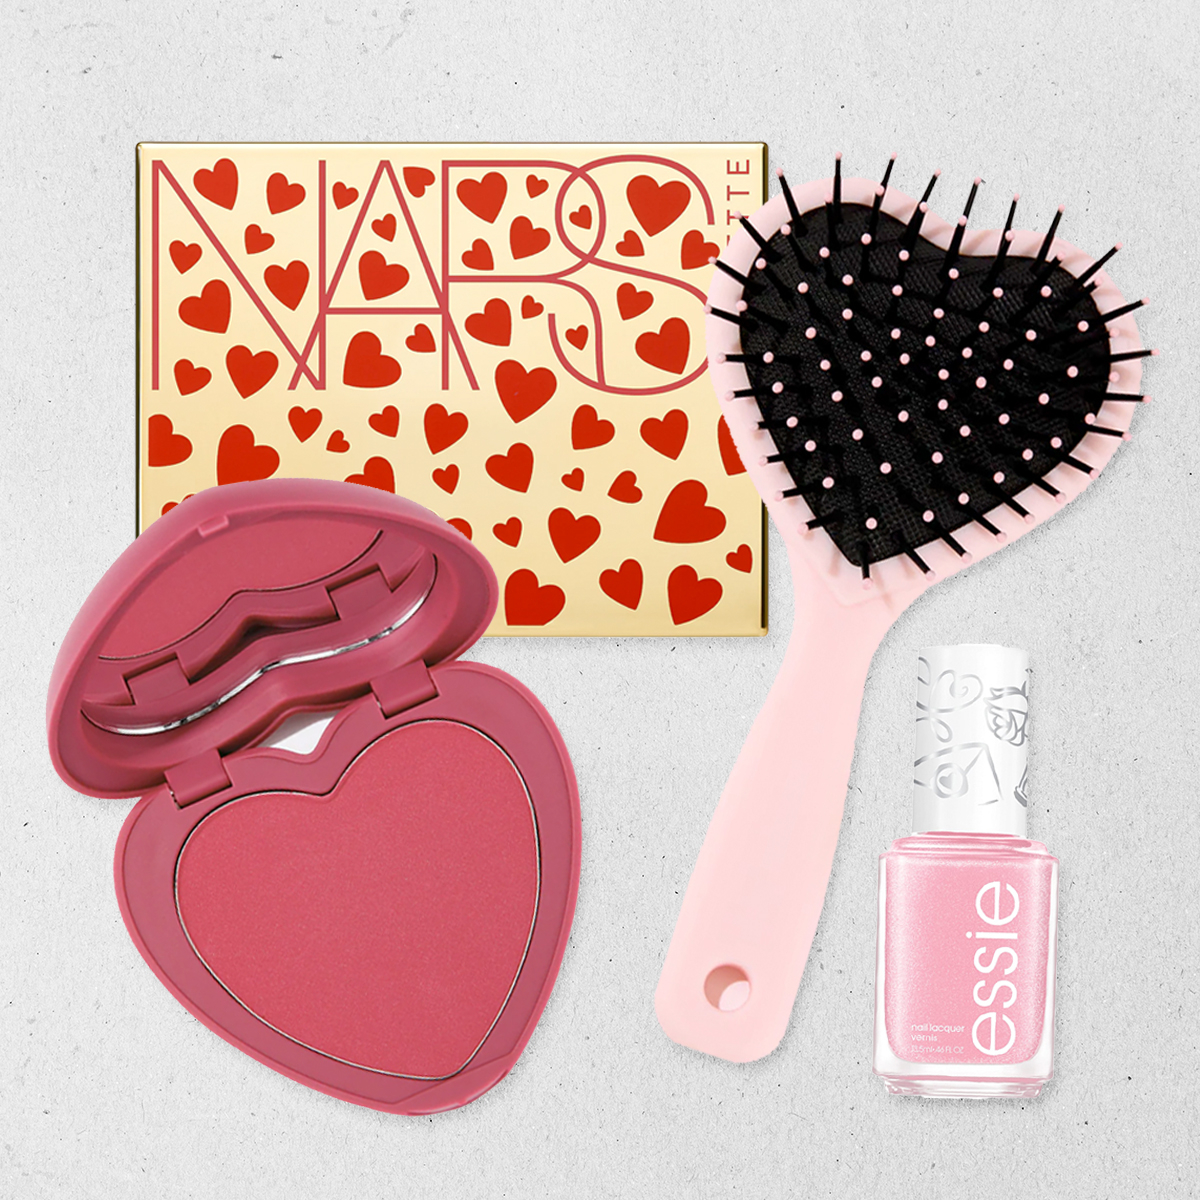 Treat Yourself to a Valentine's Day Beauty Haul With These 15 Products